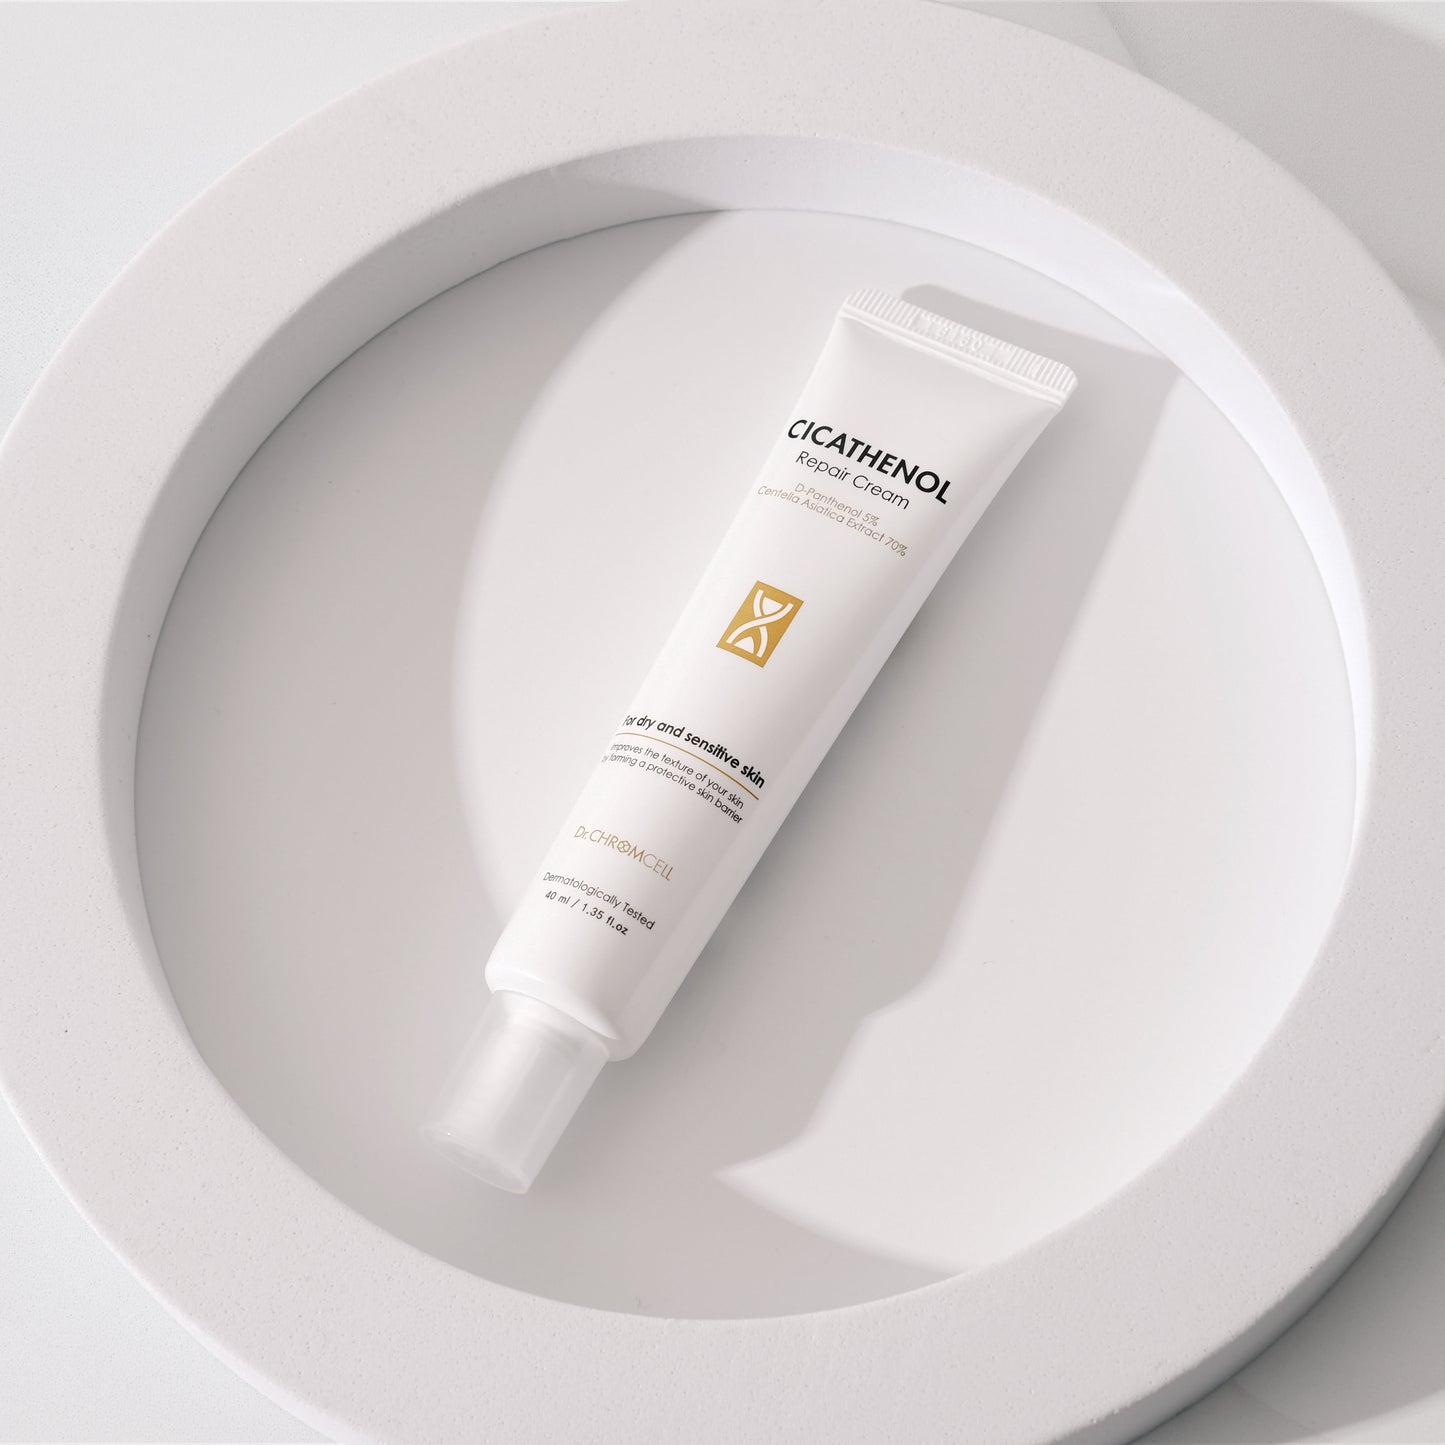 dermatologically recommended repair cream for moisturizing